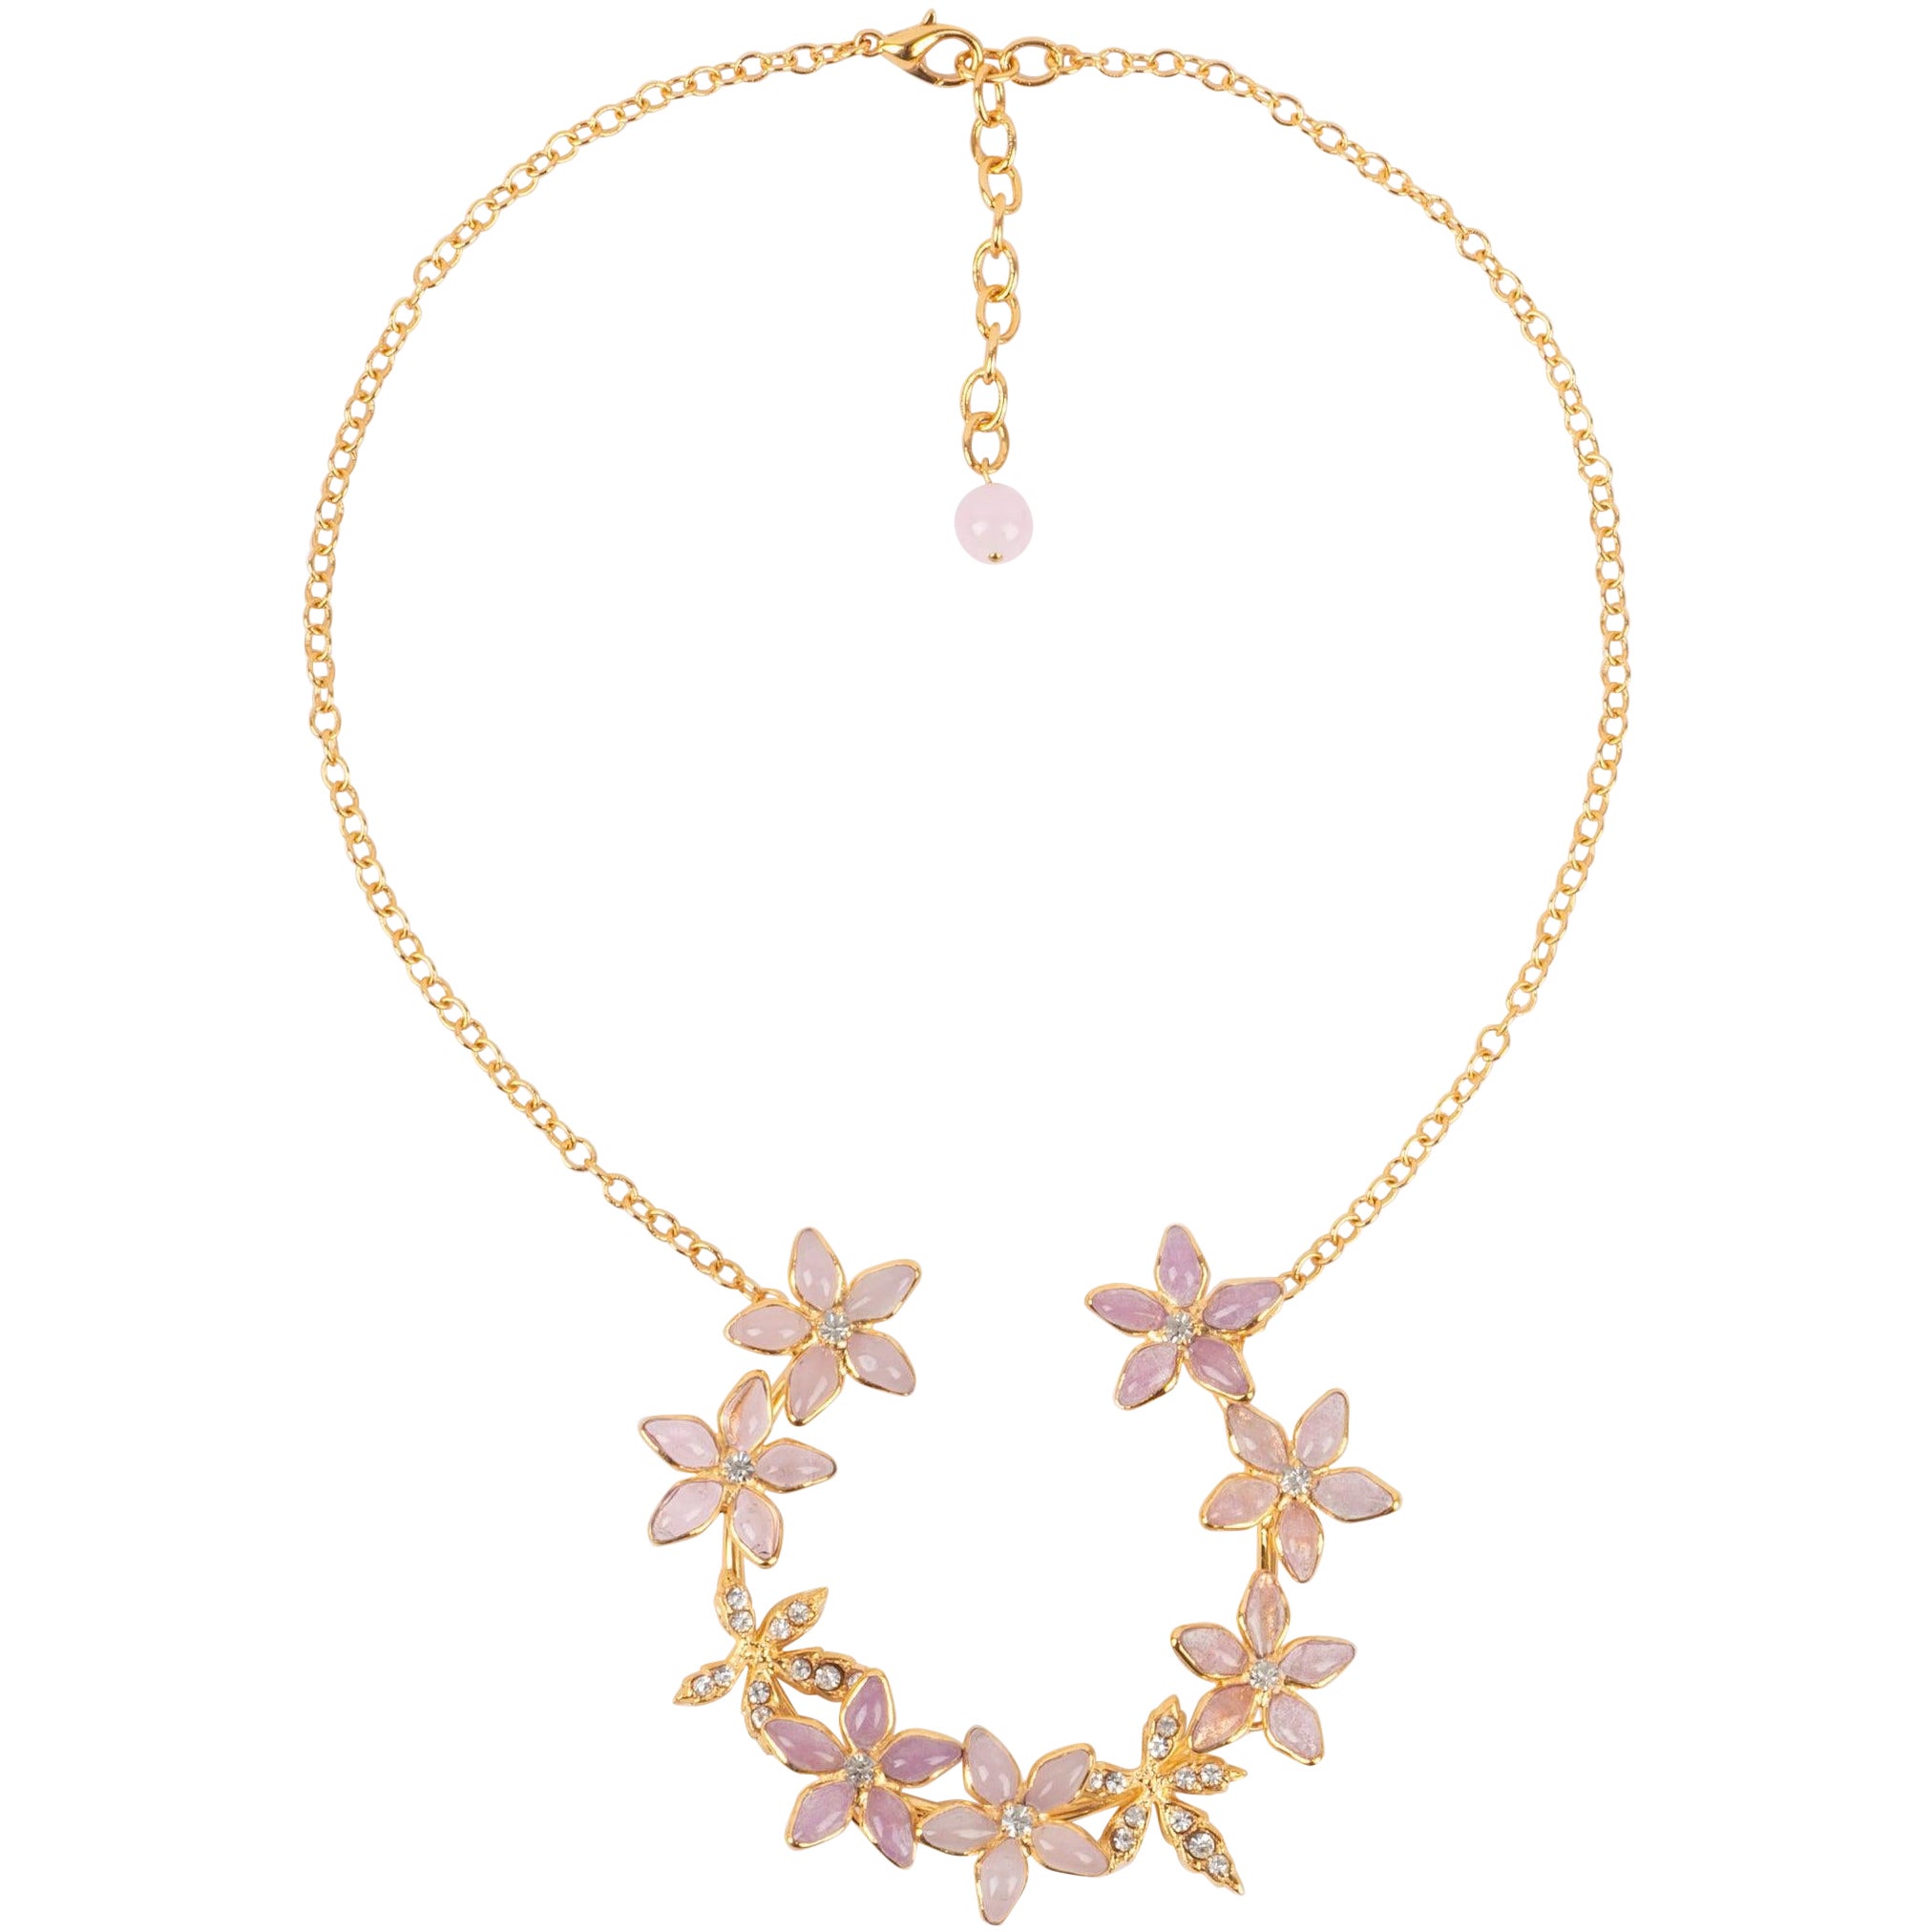 Augustine Golden Metal Necklace with Rhinestones and Glass Paste Pale Pink Tones